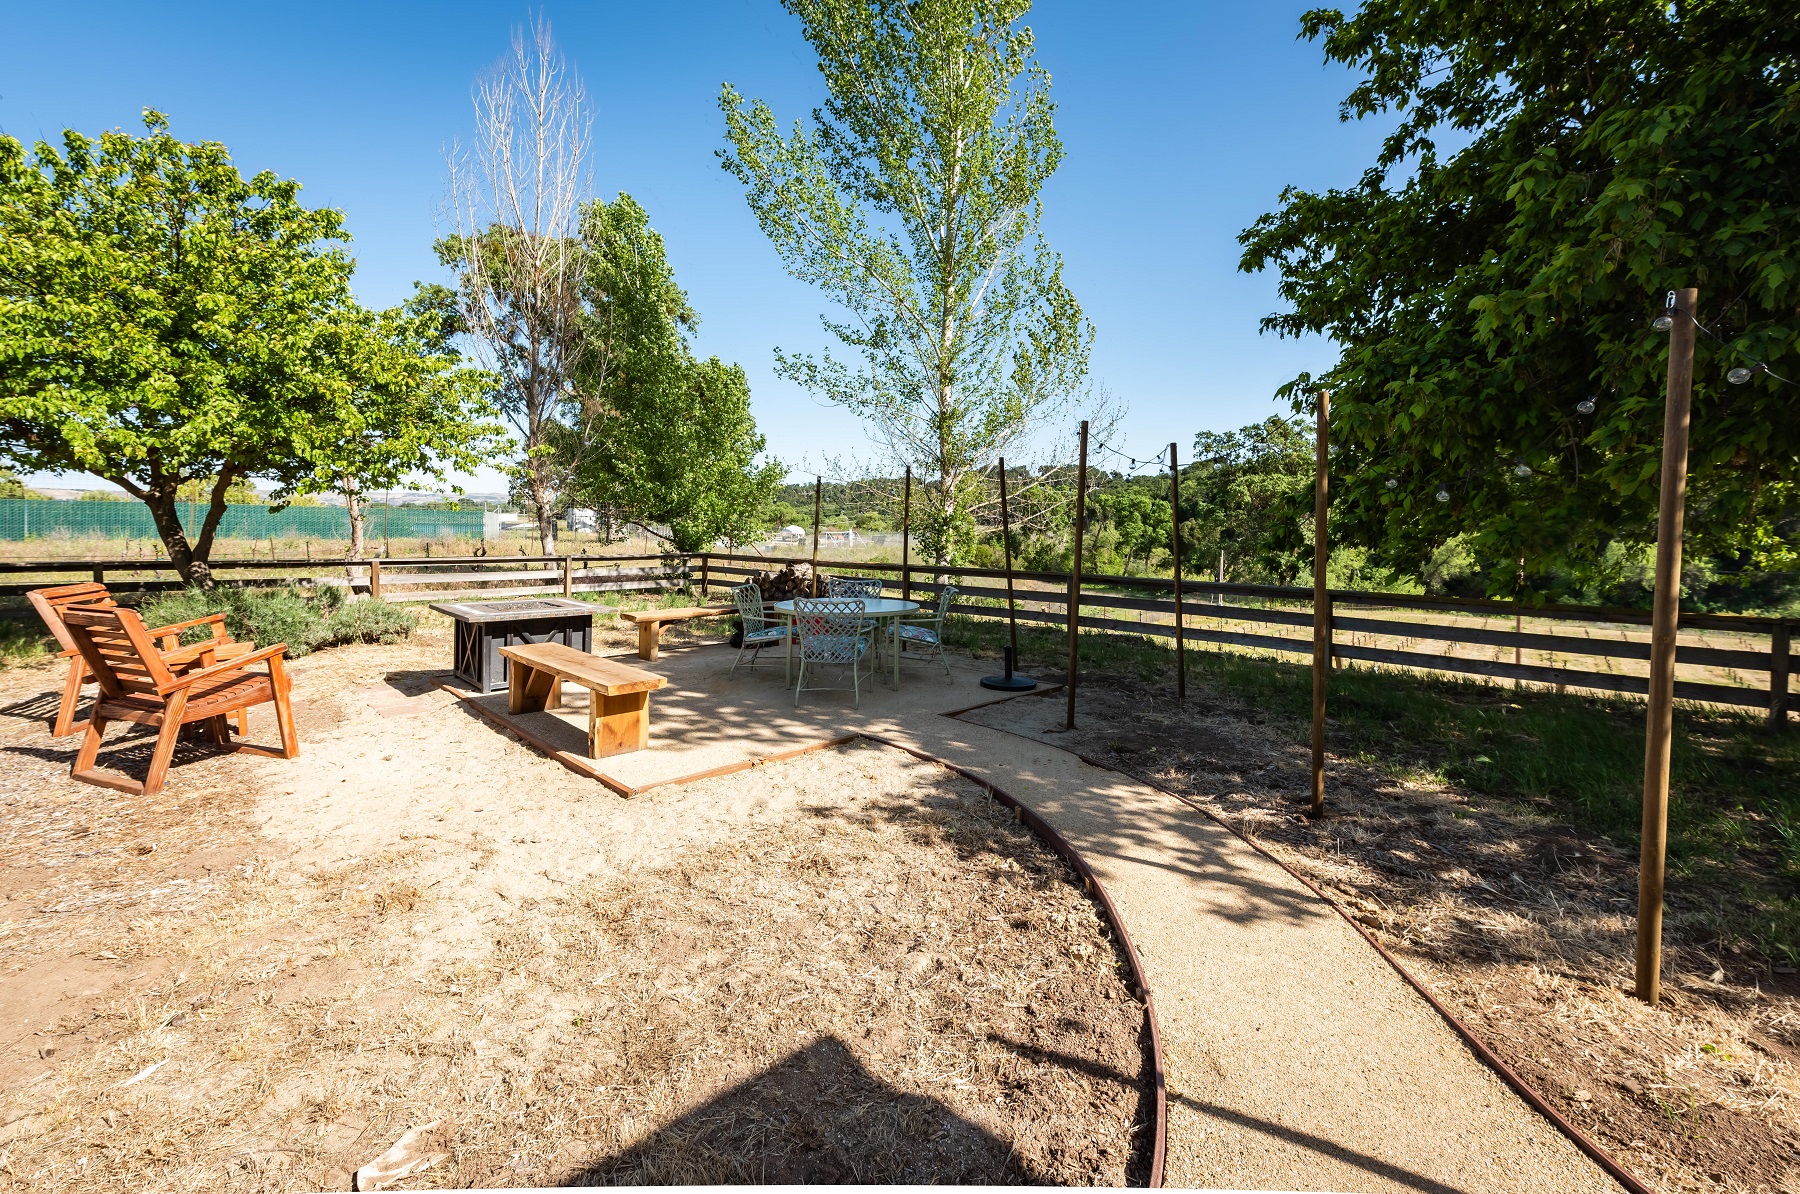 The outside yard has a fire pit and eating area for dining al fresco while enjoying the vineyard views